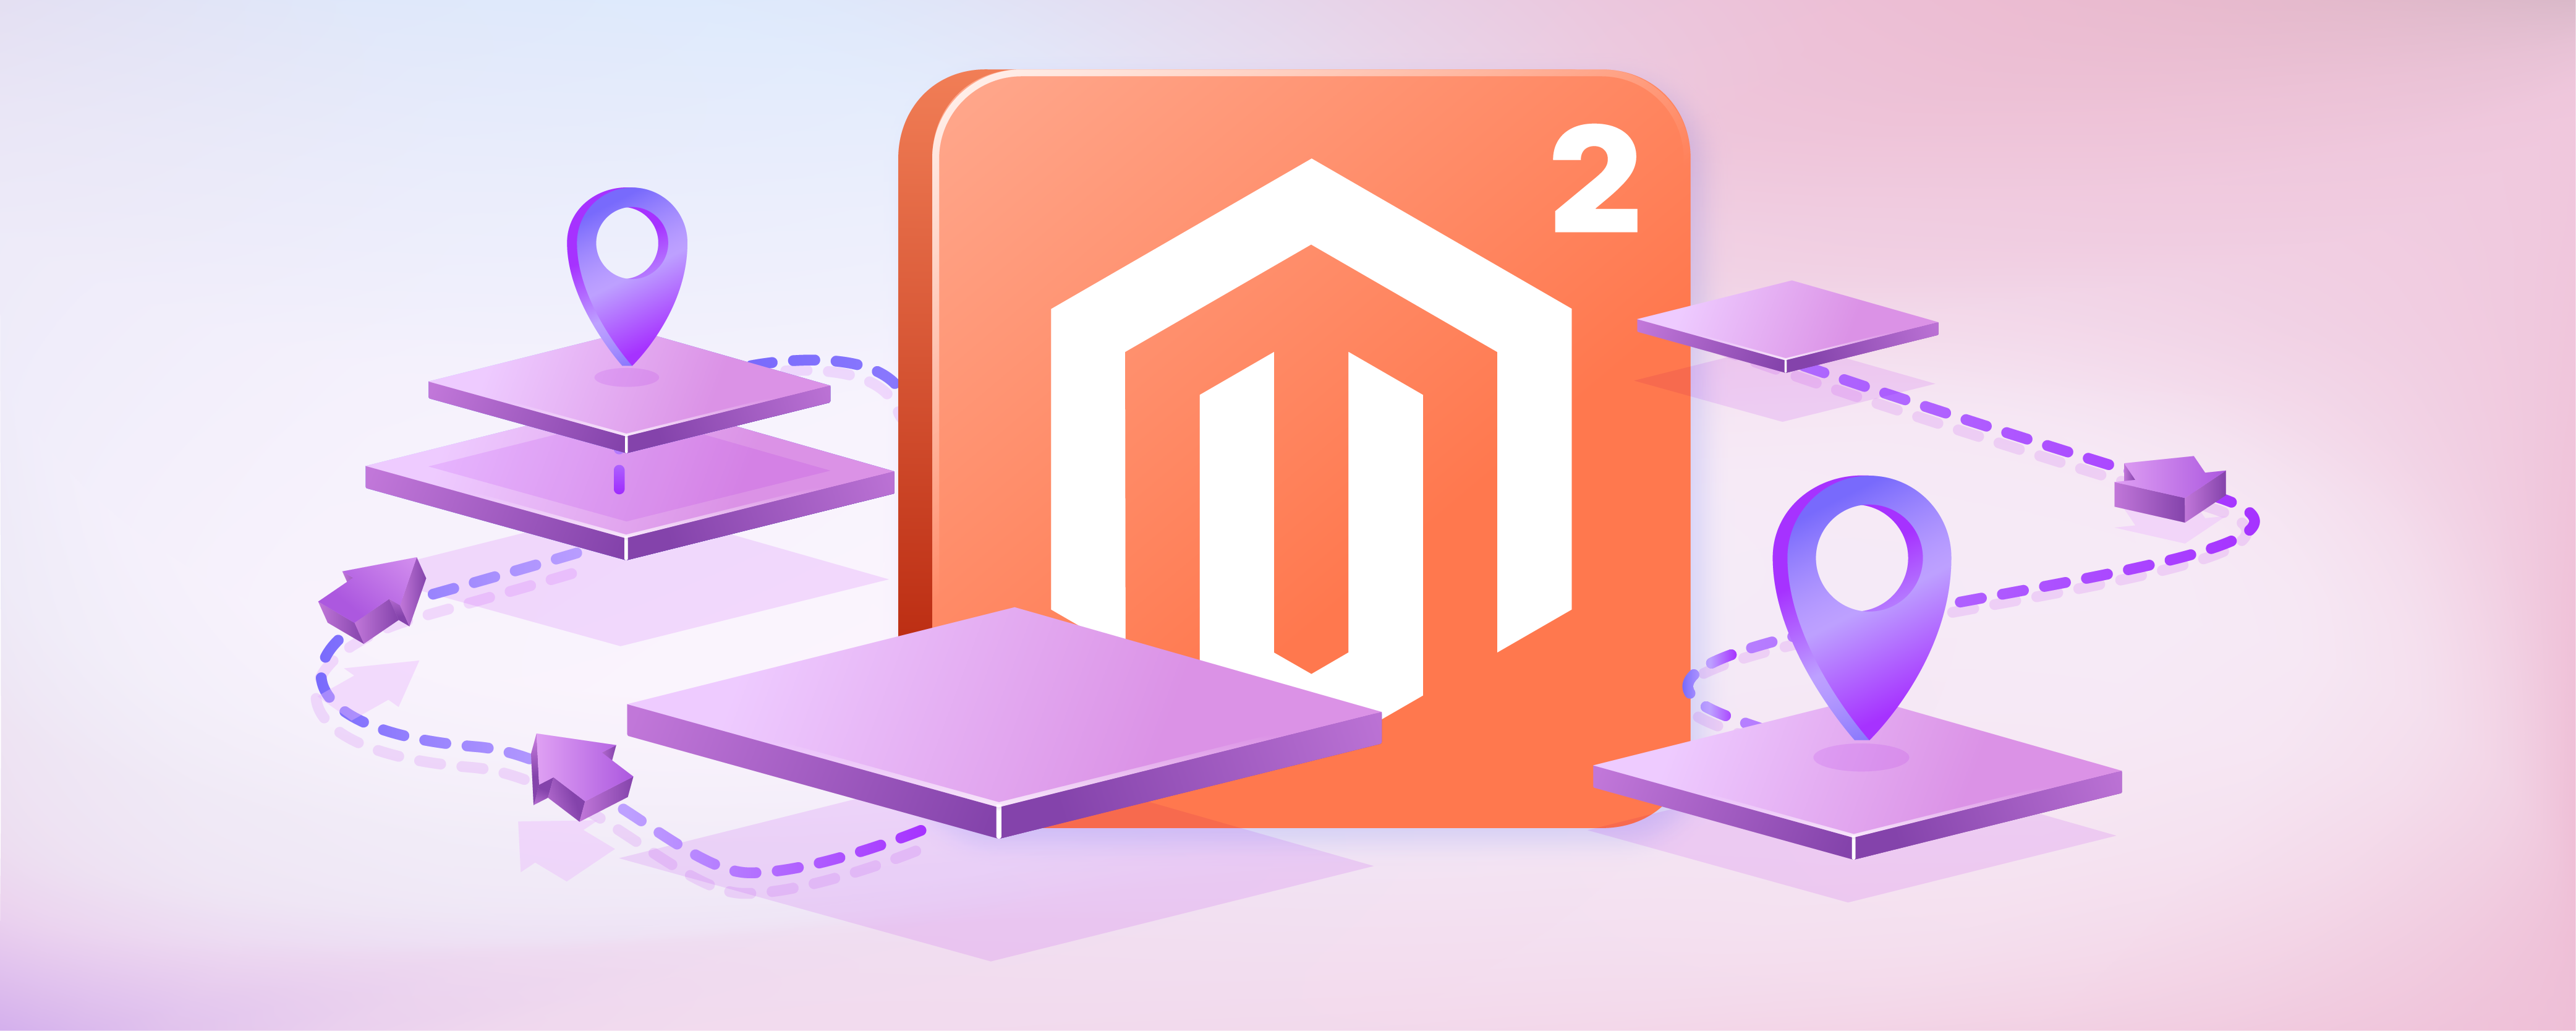 How to Setup Layered Navigation in Magento 2